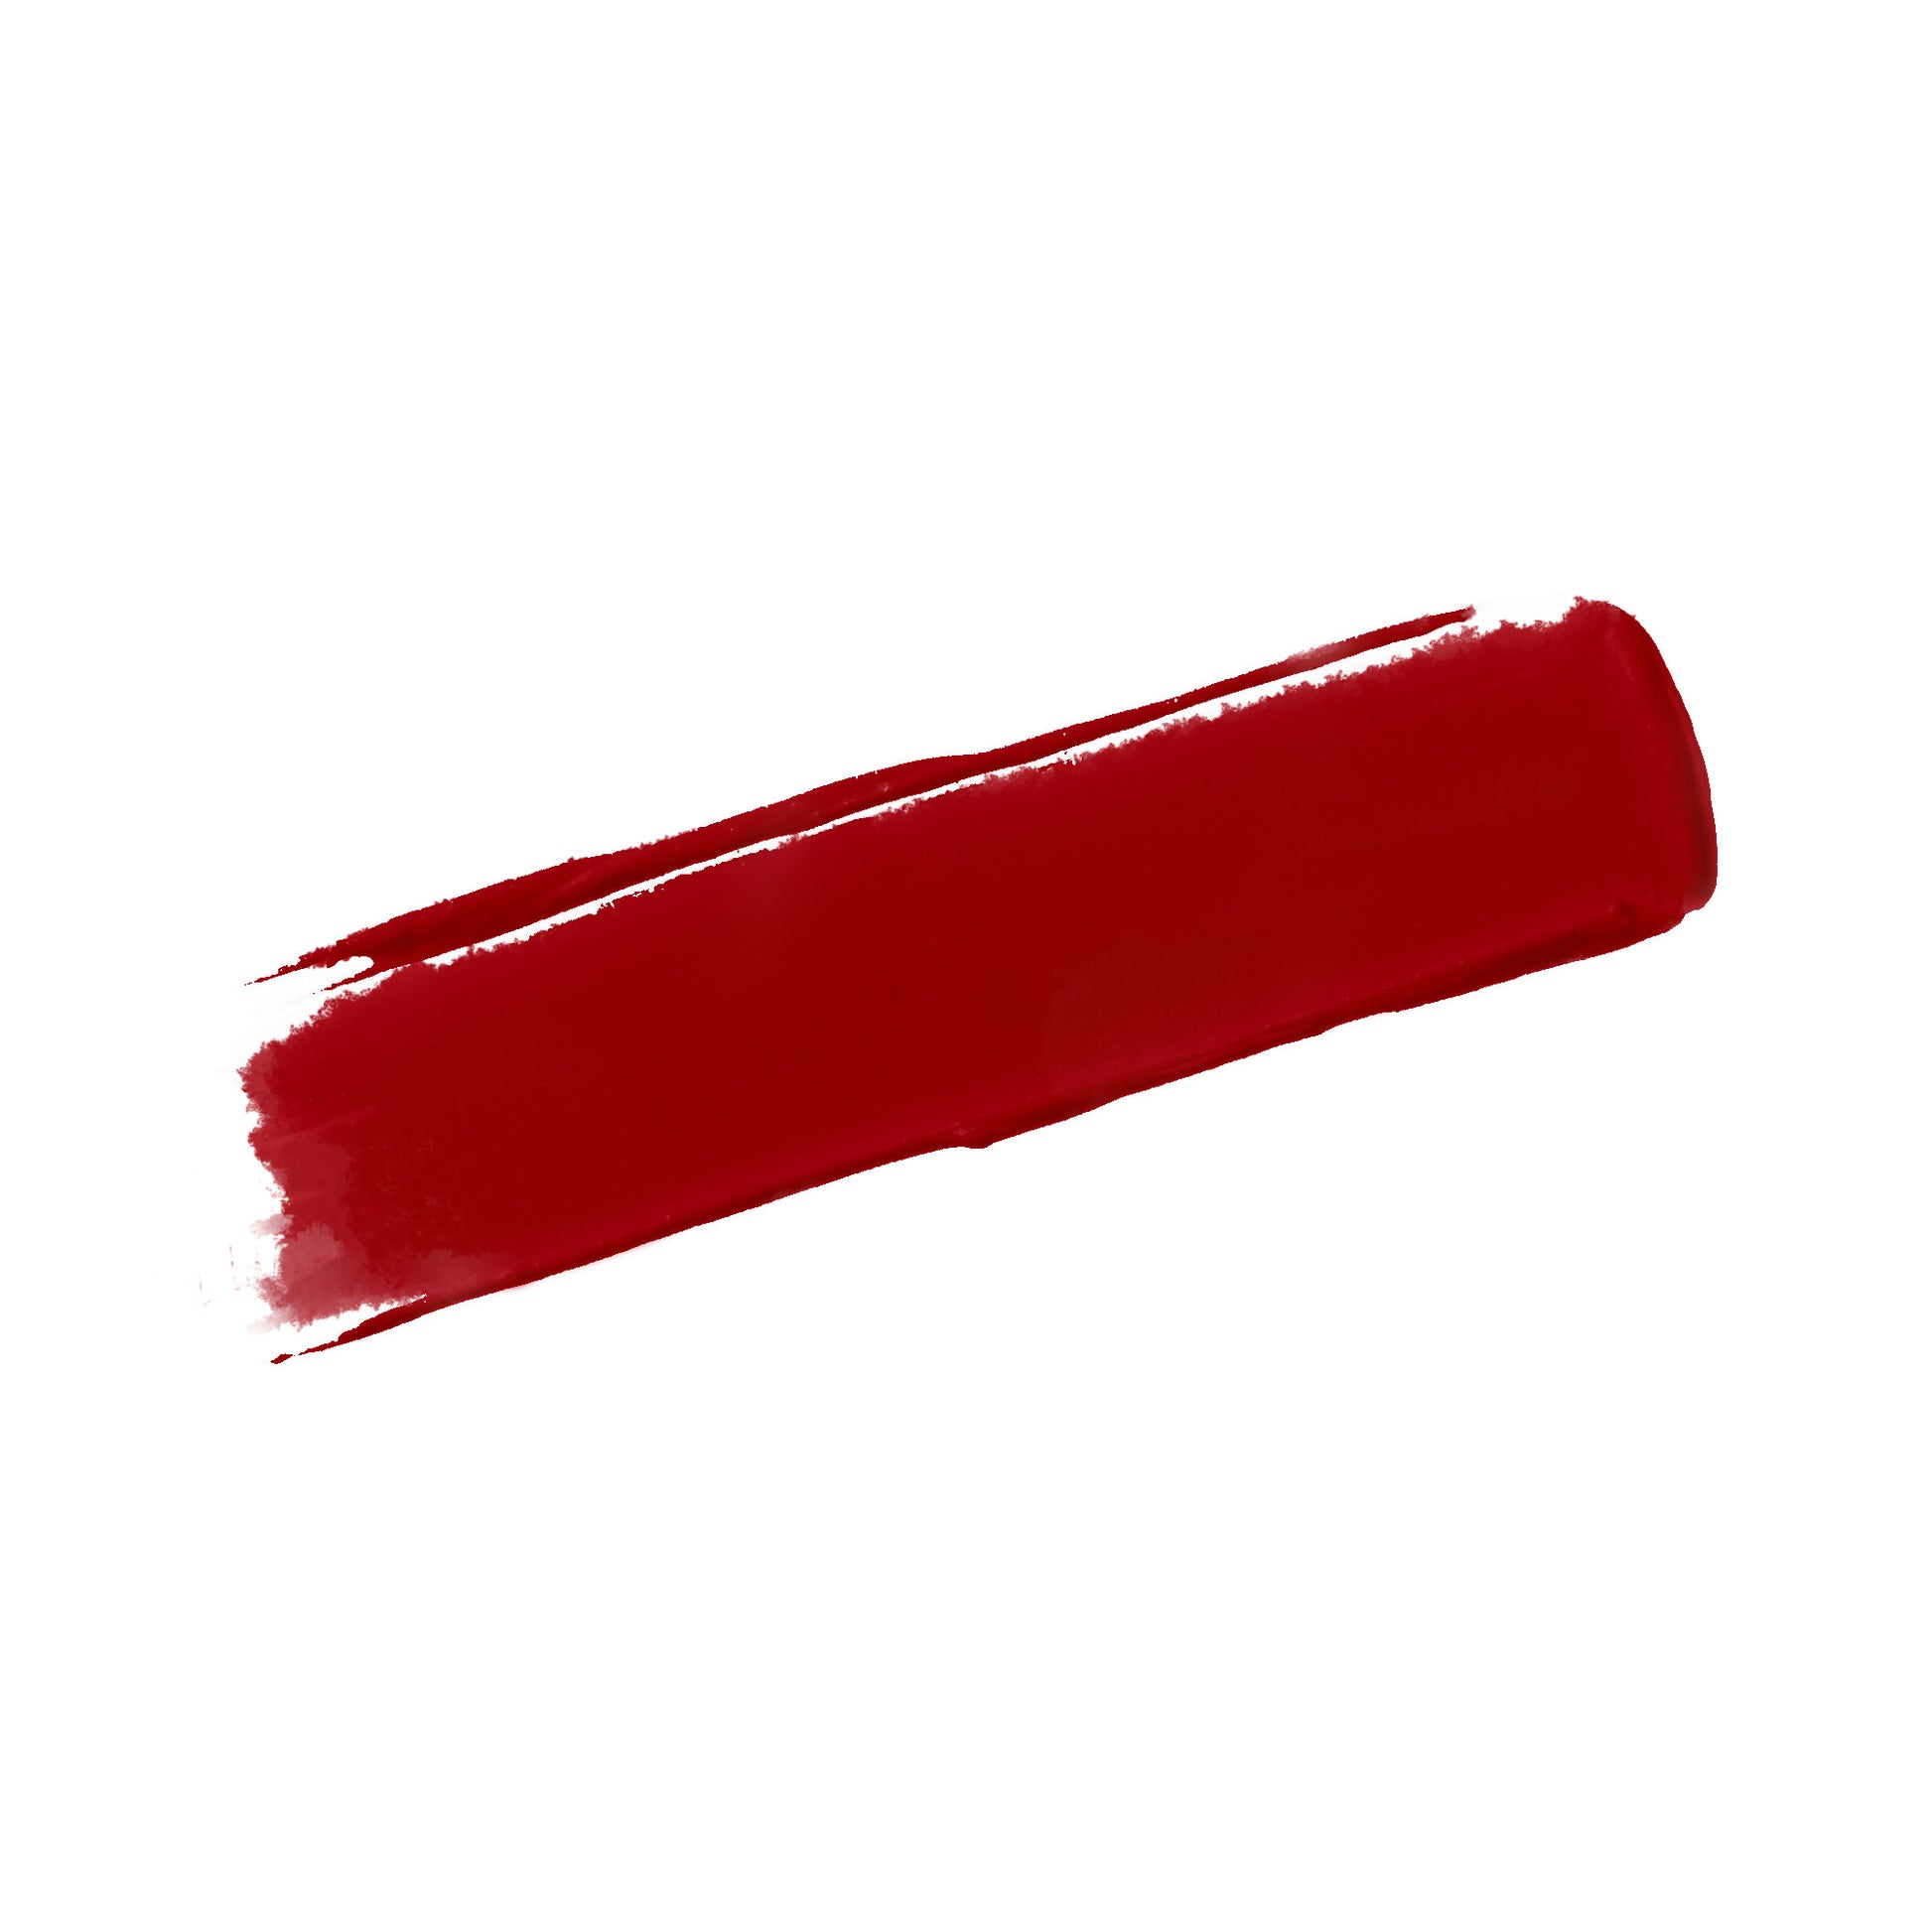 NXTE NXTEssence Hot & Spicy Liquid Lip Stick swatch color